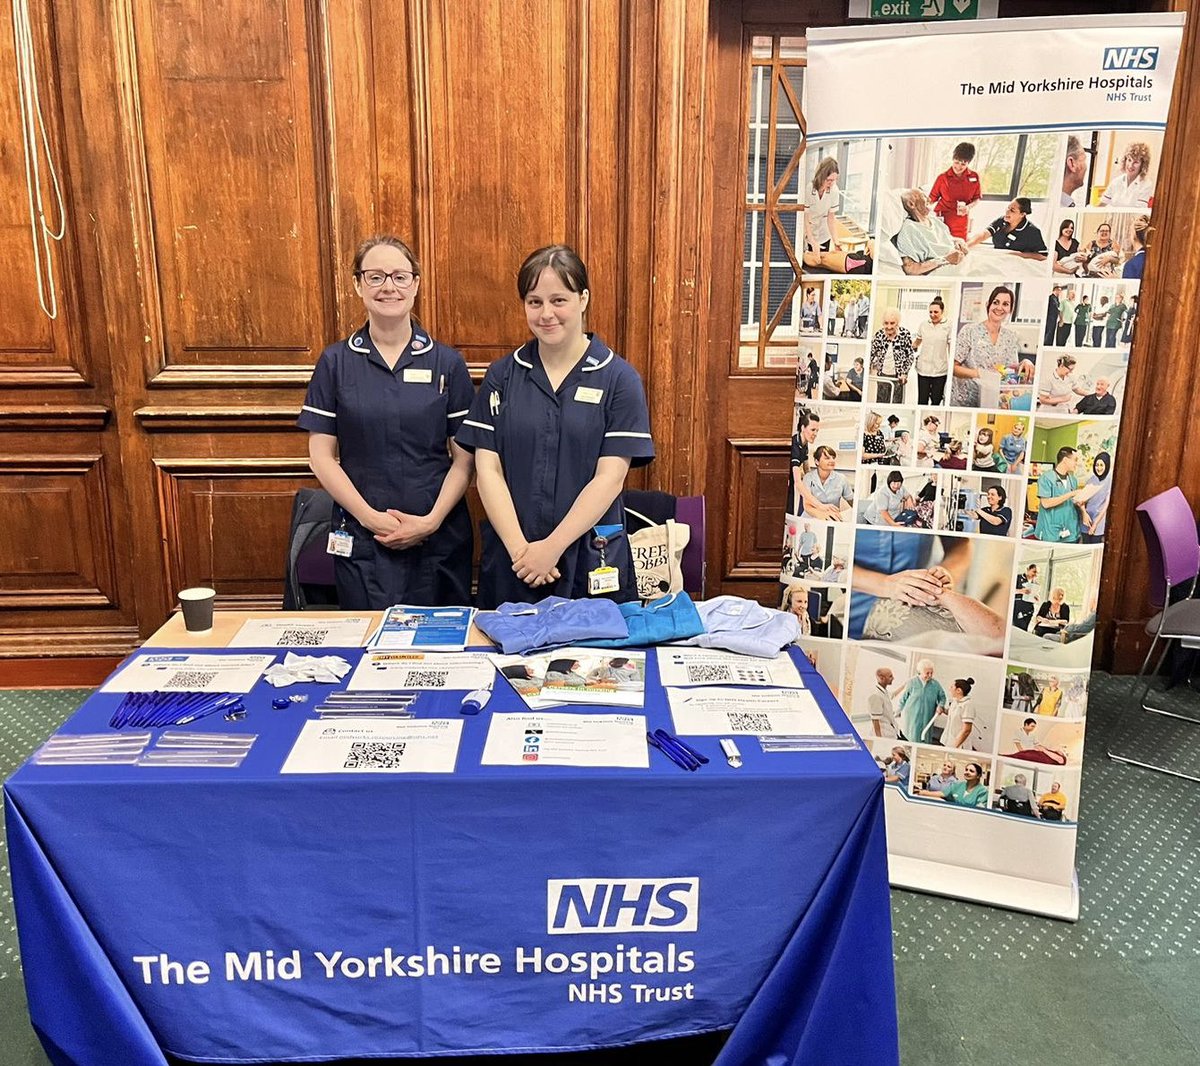 The PDEU team have been out and about in the community this week, promoting healthcare careers at Mid Yorkshire! Thank you to @leedscitycoll, @kirkleescollege,@leedsbeckett and Elliott Hudson college for having us! #MYTeam ⭐️